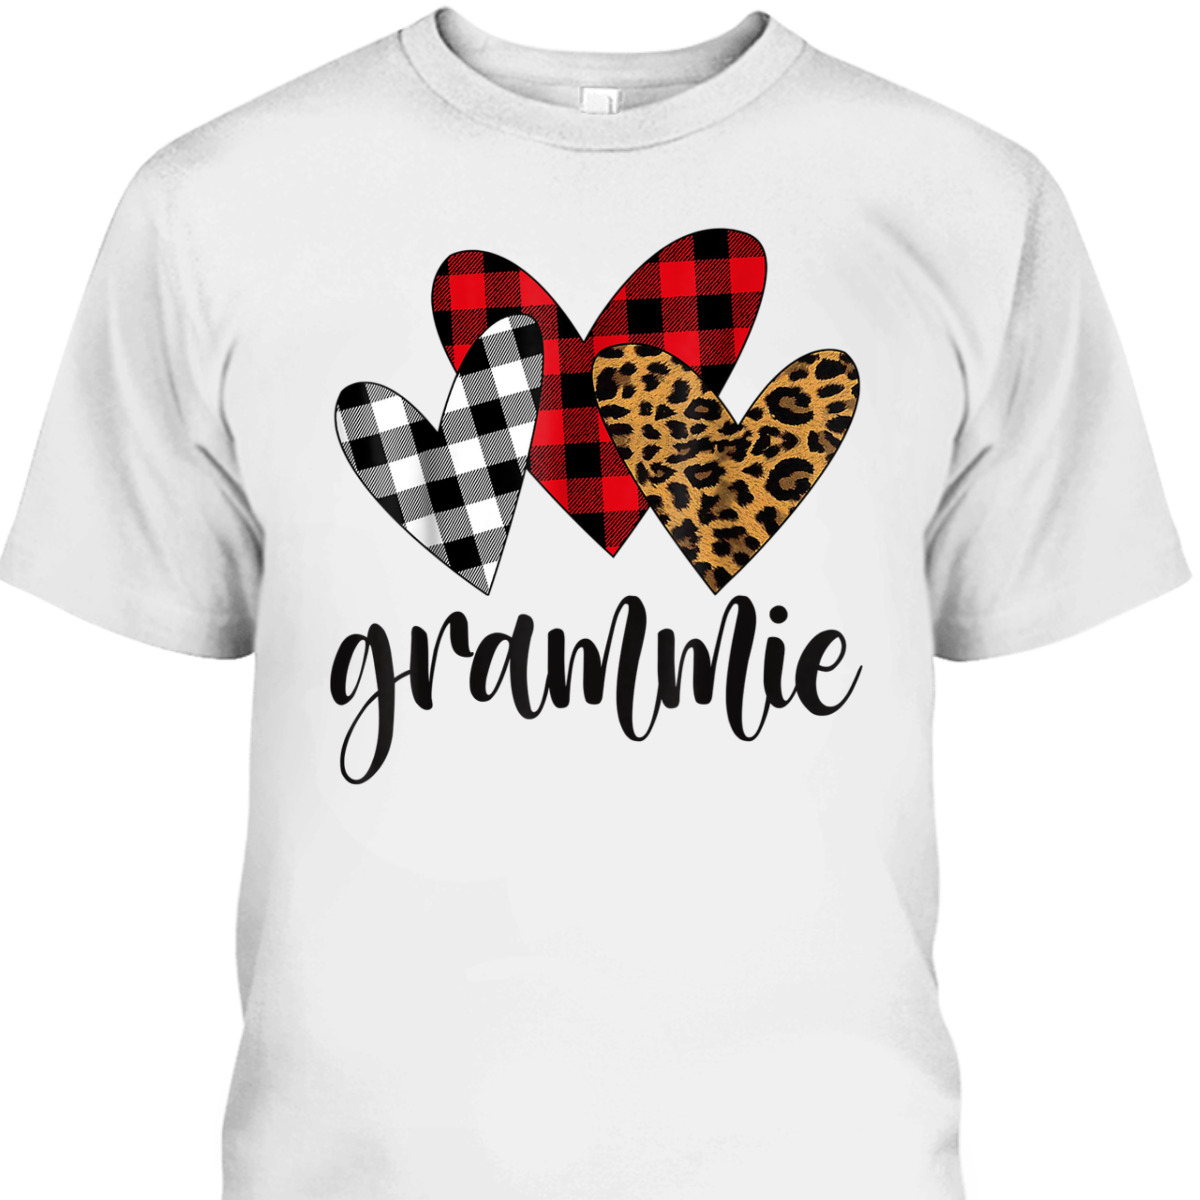 Mother's Day T-Shirt Grammie Lover Gift For Mom From Daughter